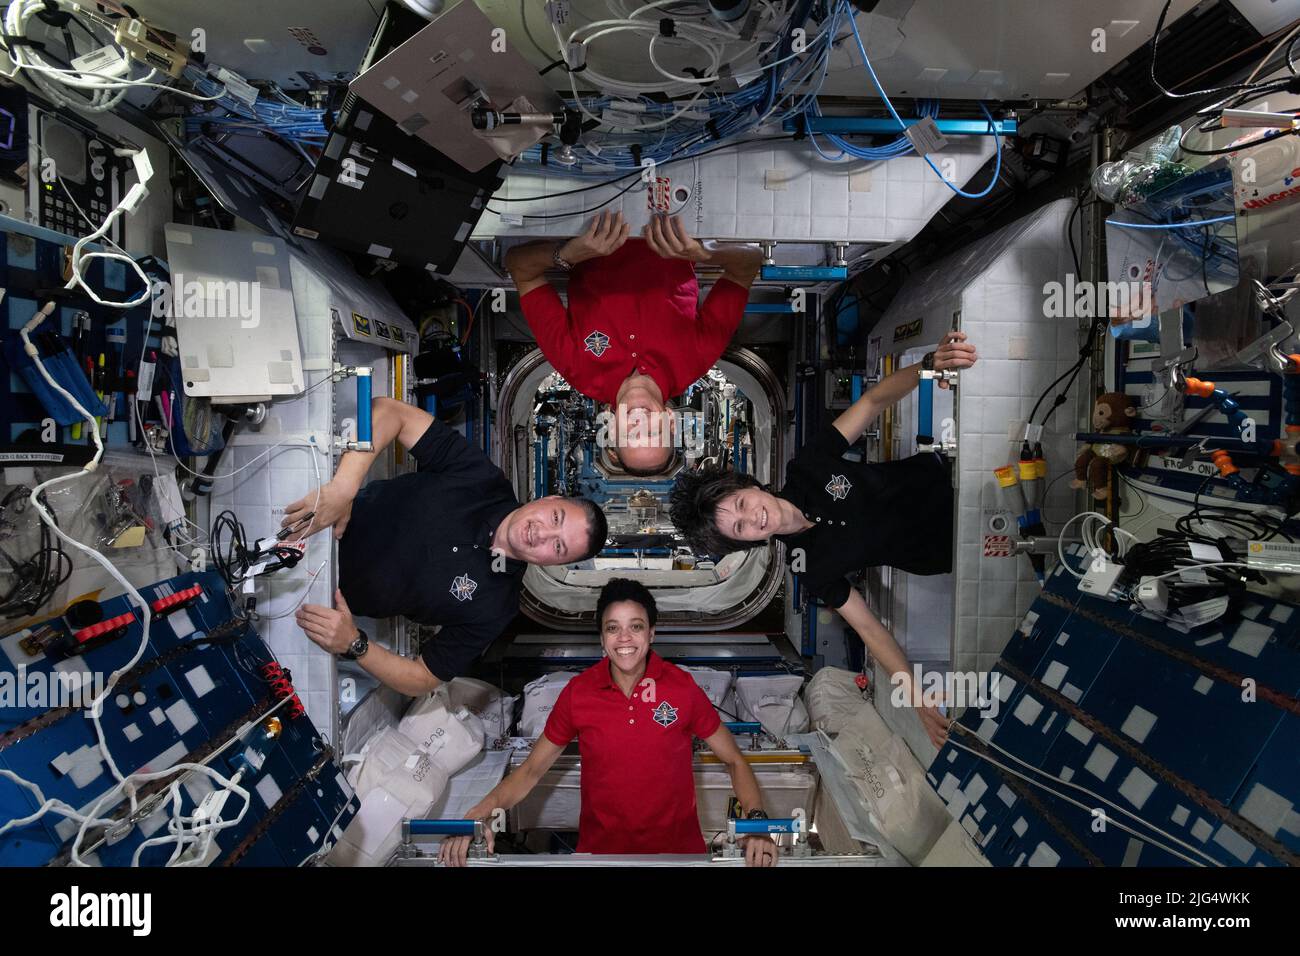 International Space Station Expedition 67 Flight Engineers (clockwise from bottom) Jessica Watkins, Kjell Lindgren, and Bob Hines, of NASA, and Samantha Cristoforetti of the ESA, pose for a portrait inside their individual crew quarters aboard the orbiting spacelab, July 2, 2022 in Earth Orbit. Stock Photo